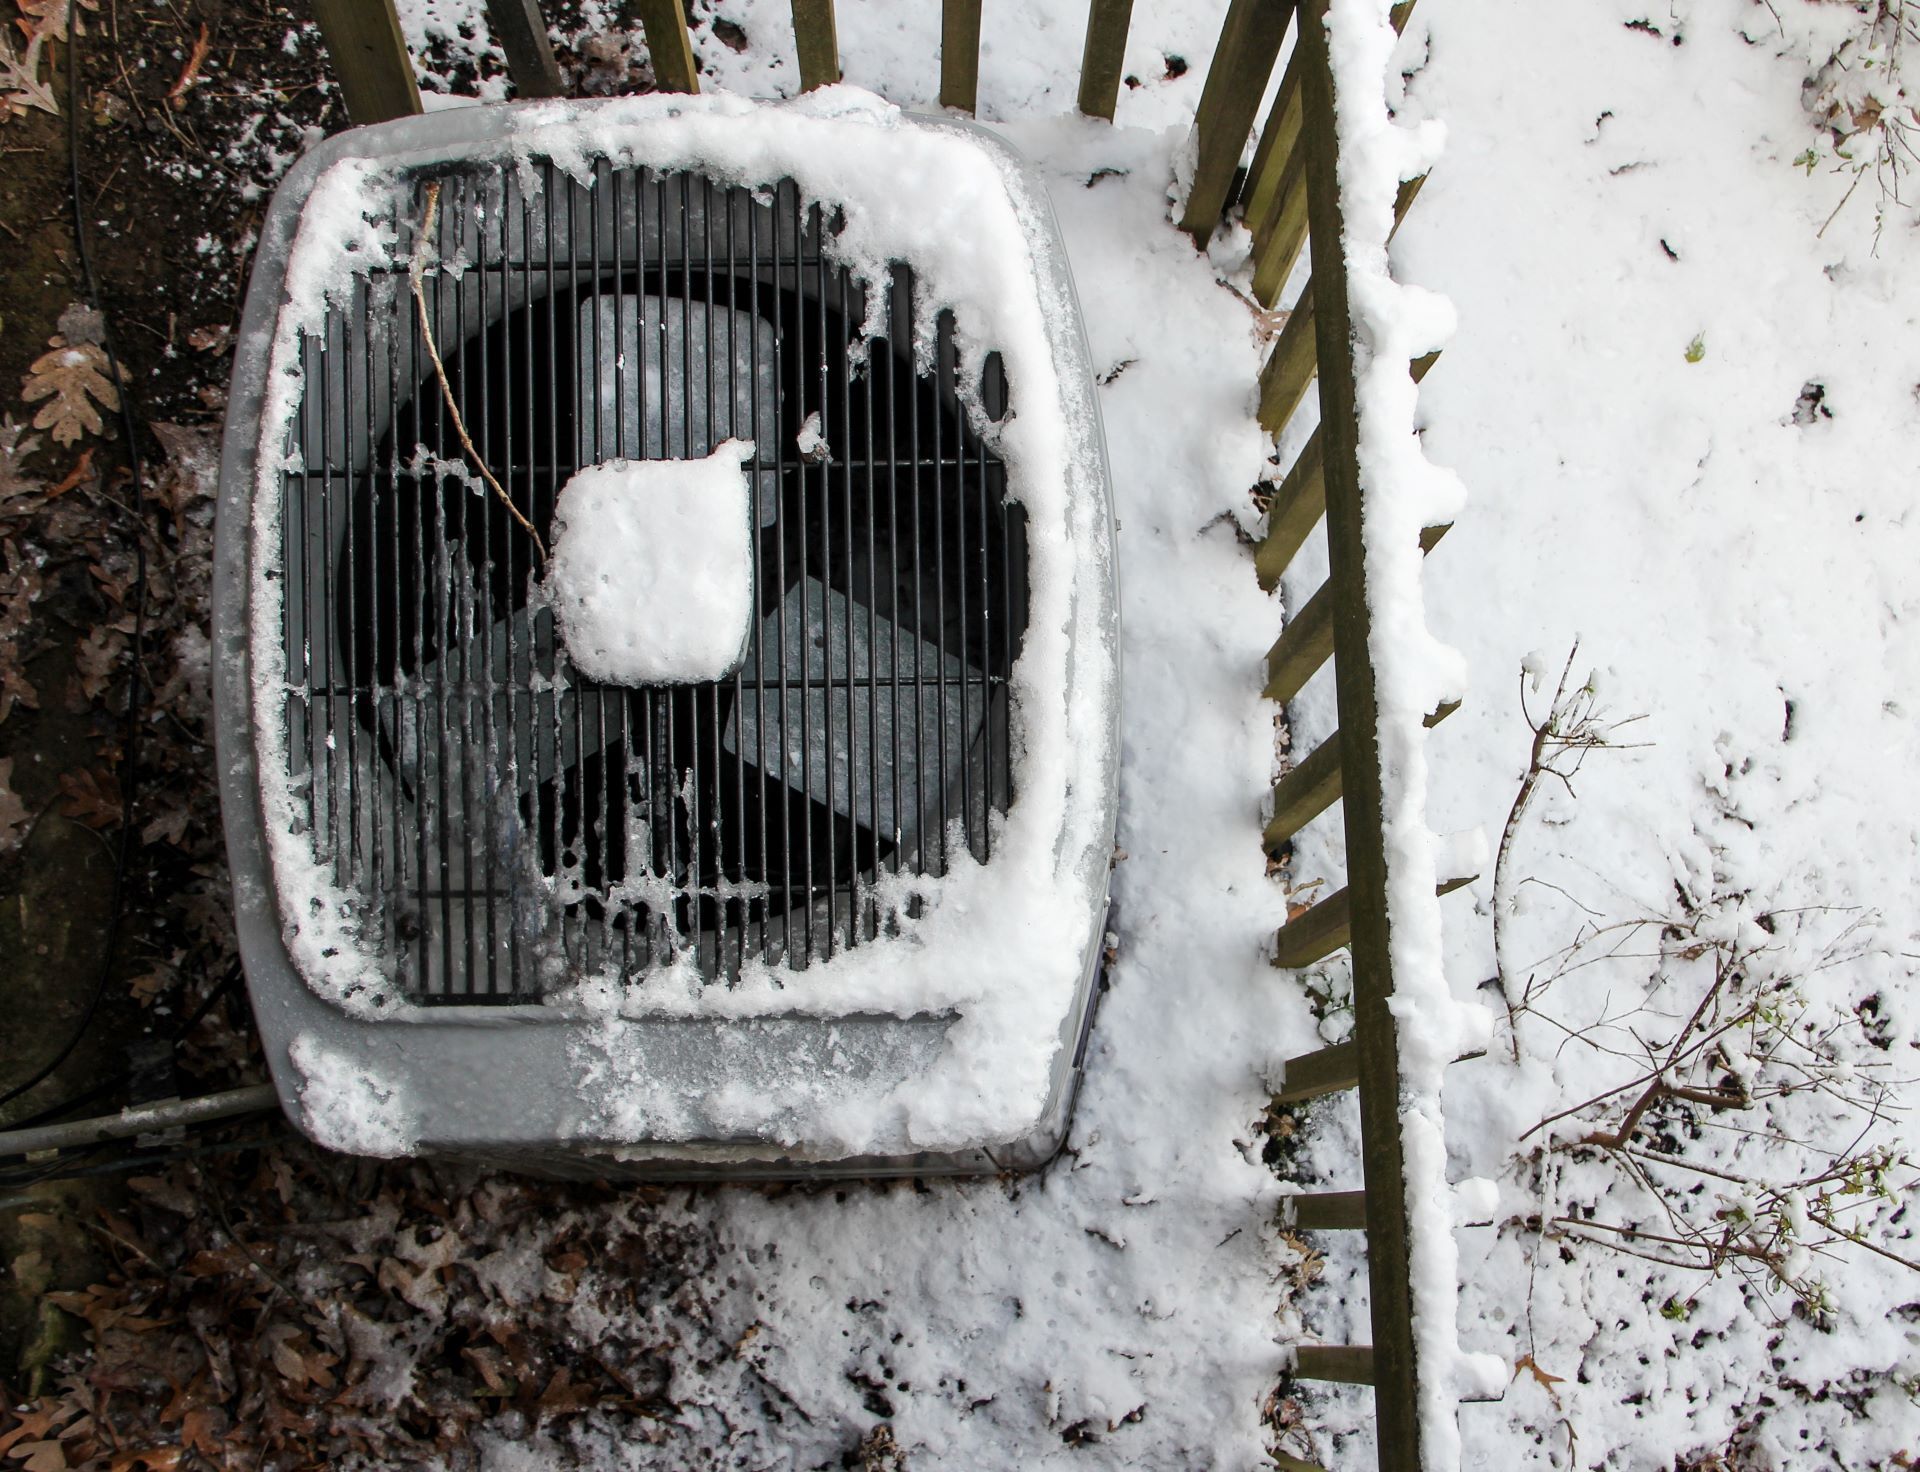 Overhead view of central air HVAC unit outside in the winter with snow covering